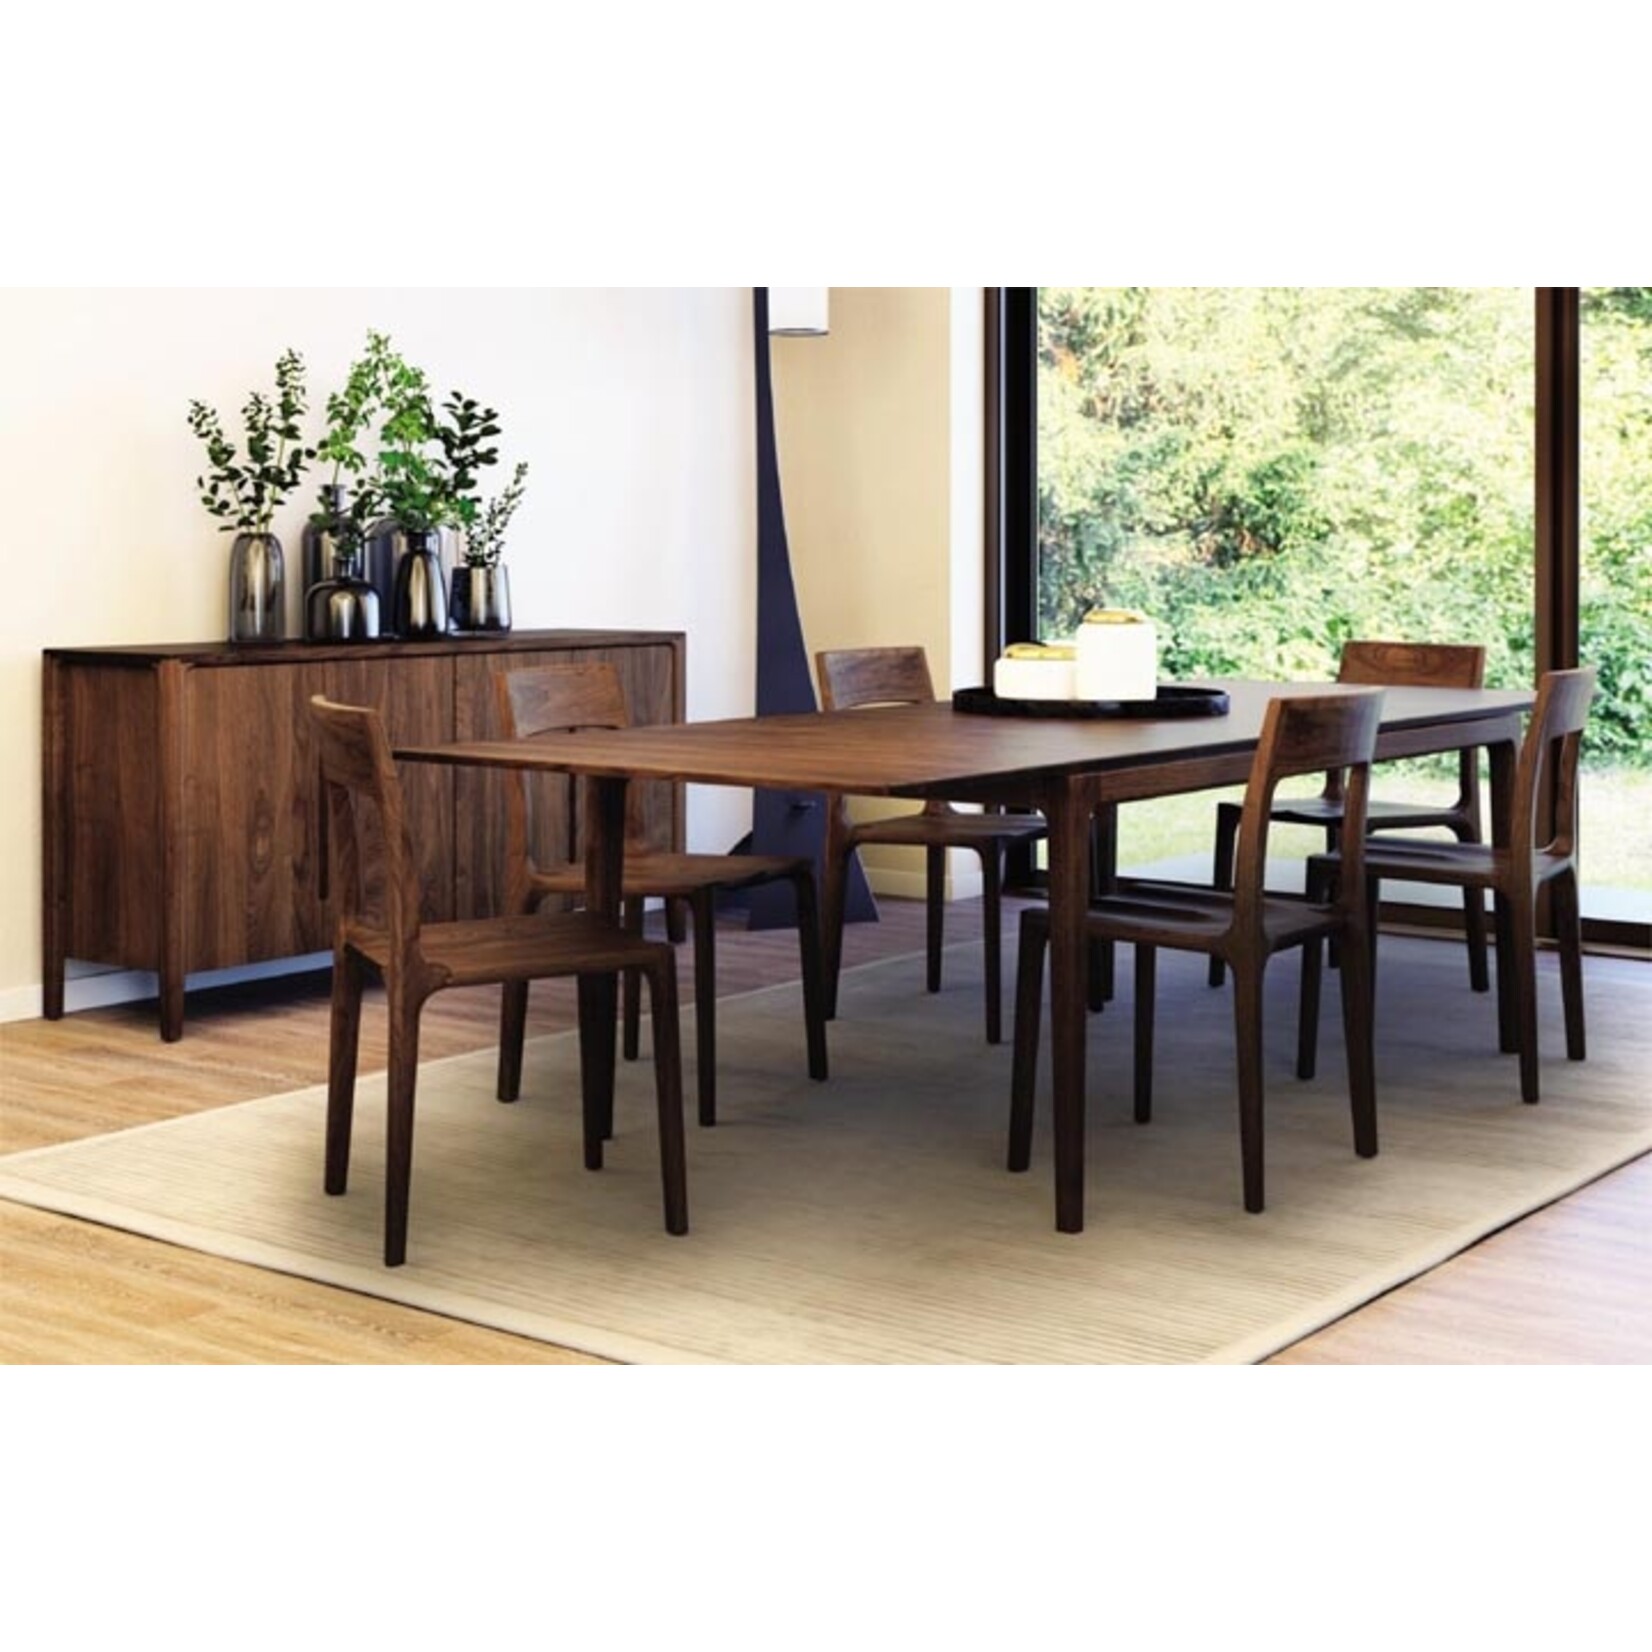 Copeland Lisse Extension Walnut Table